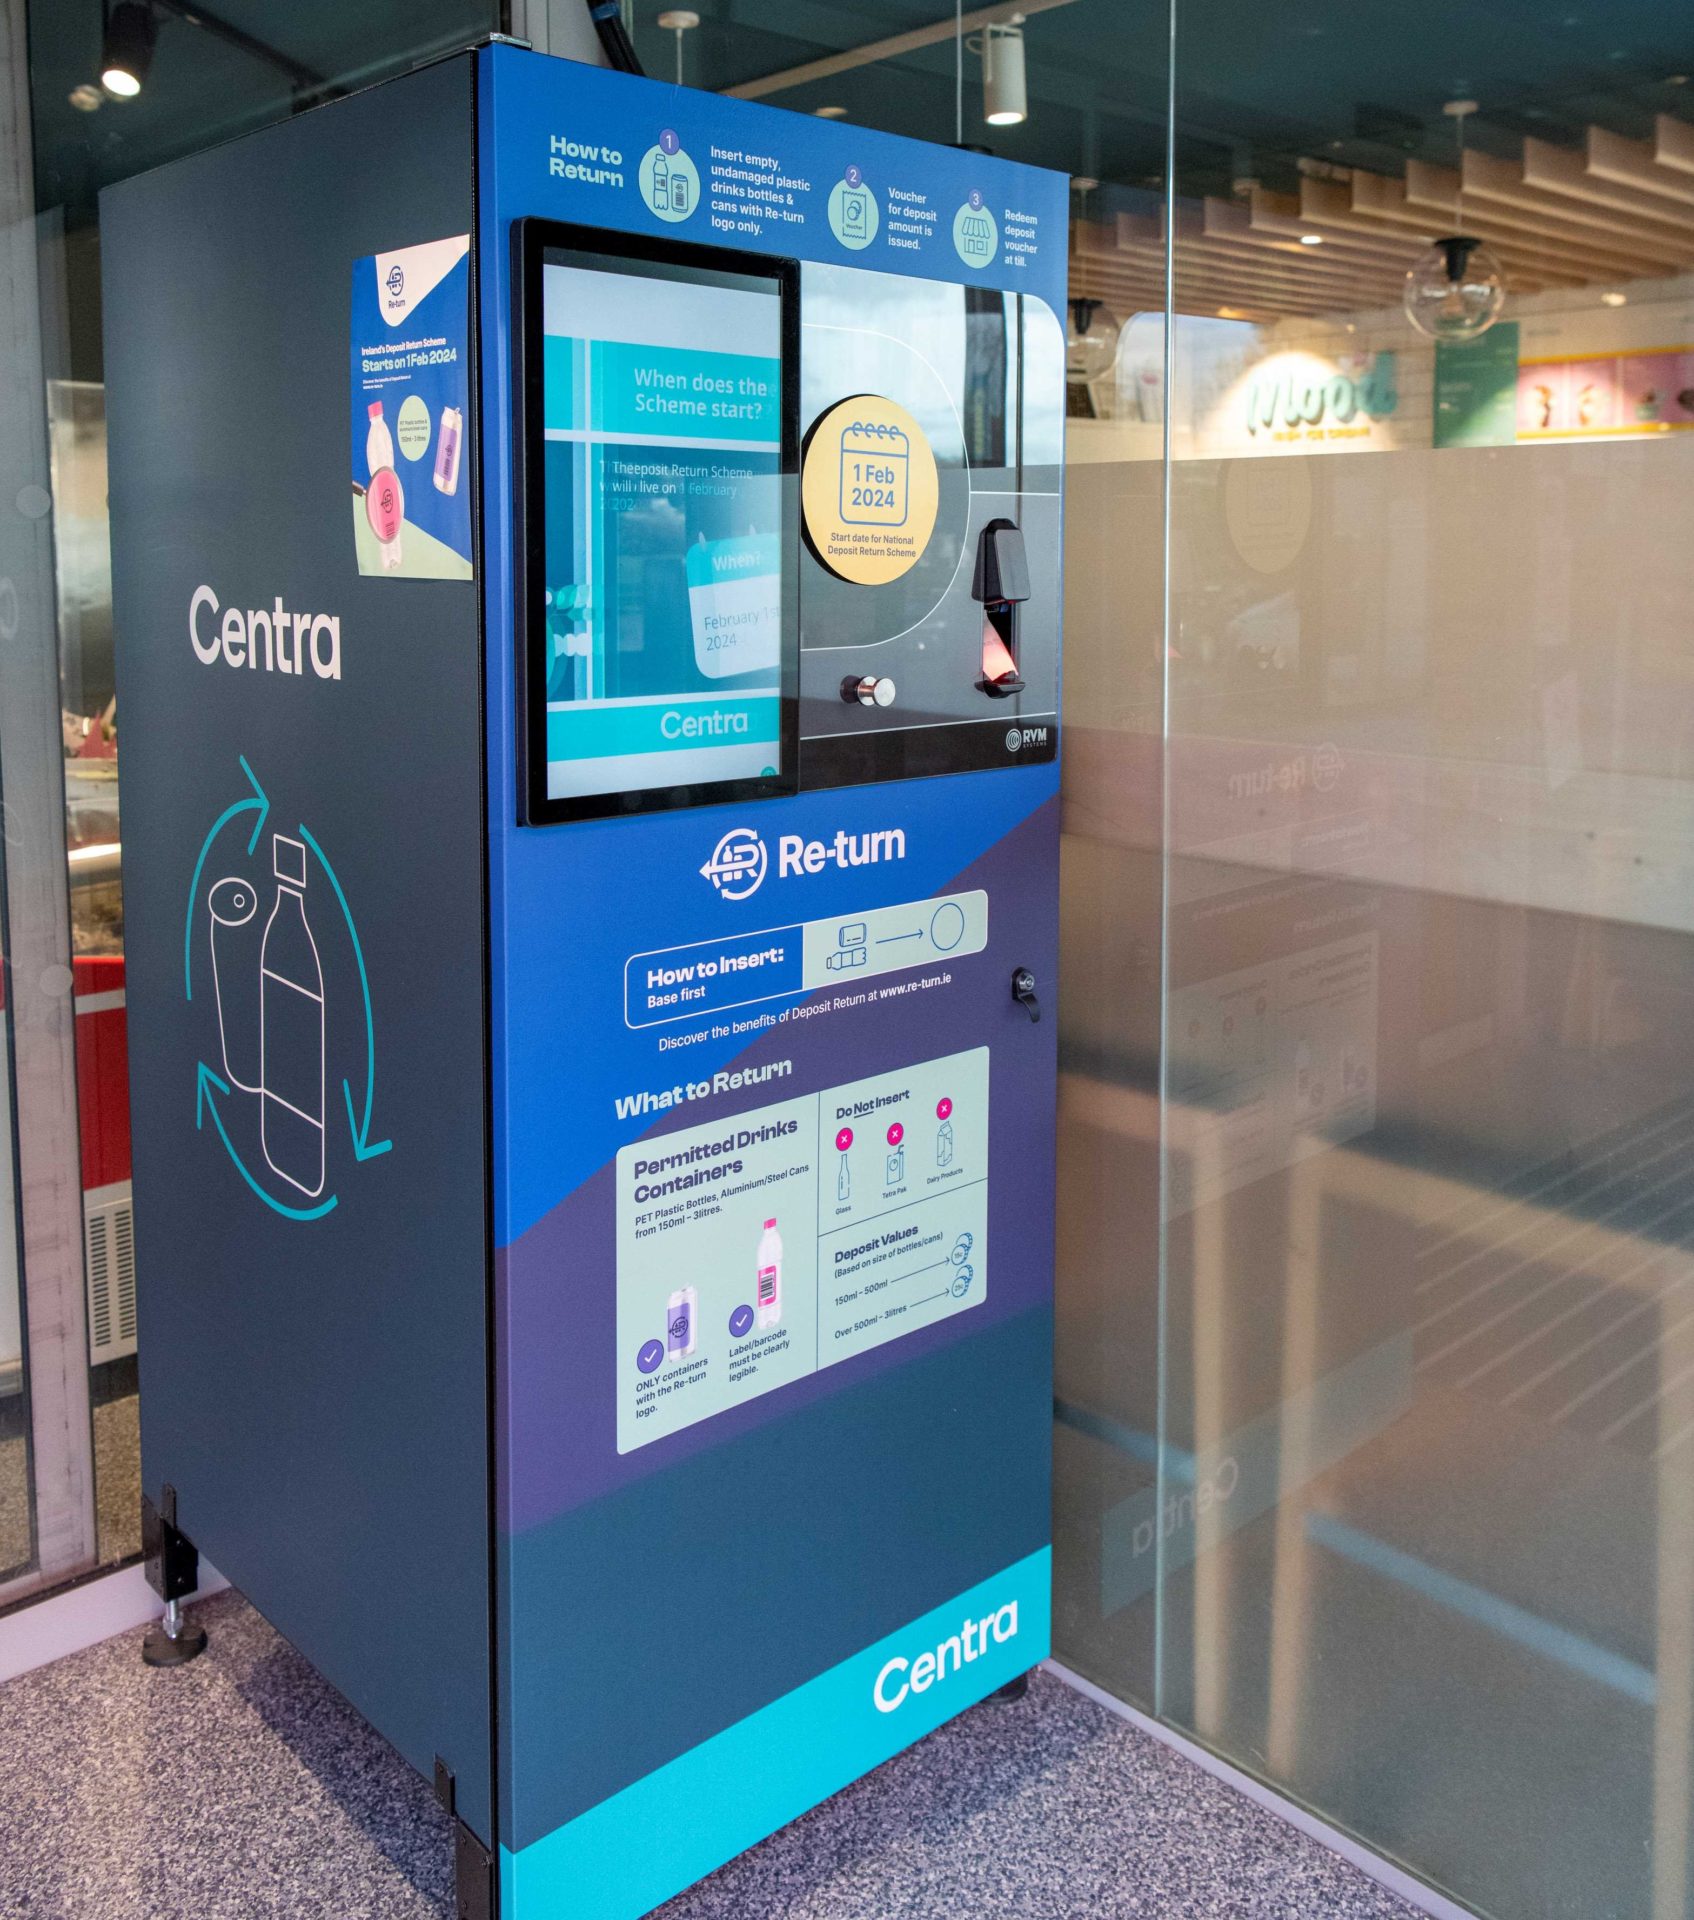 An example of a Reverse Vending Machine in a Centra shop